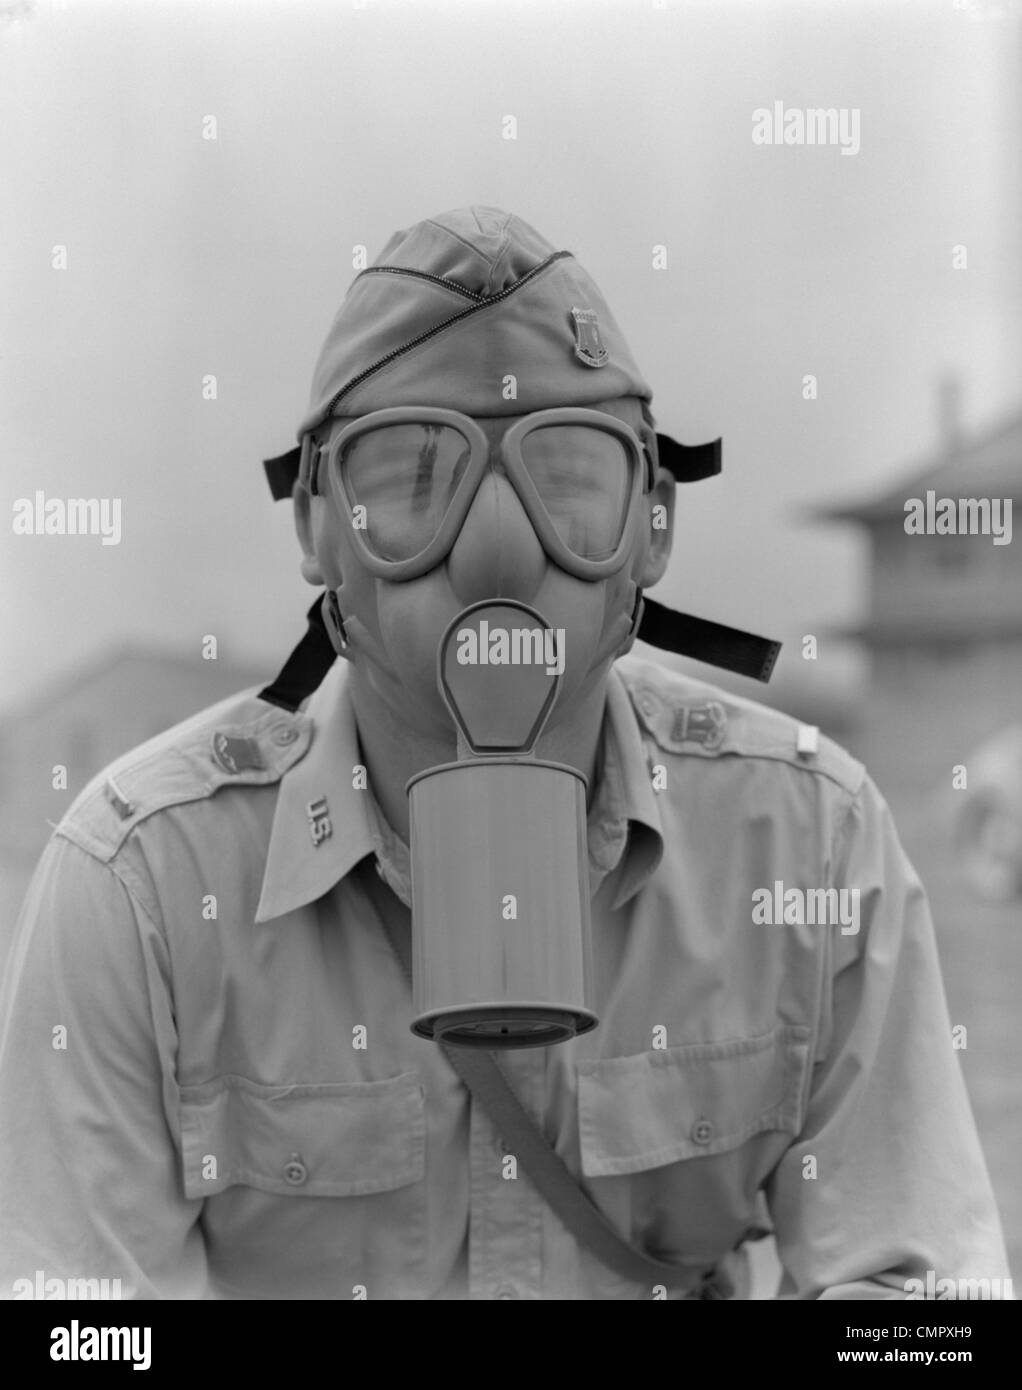 1940s 1942 MAN SOLDIER ARMY LIEUTENANT WEARING A GAS MASK Stock Photo